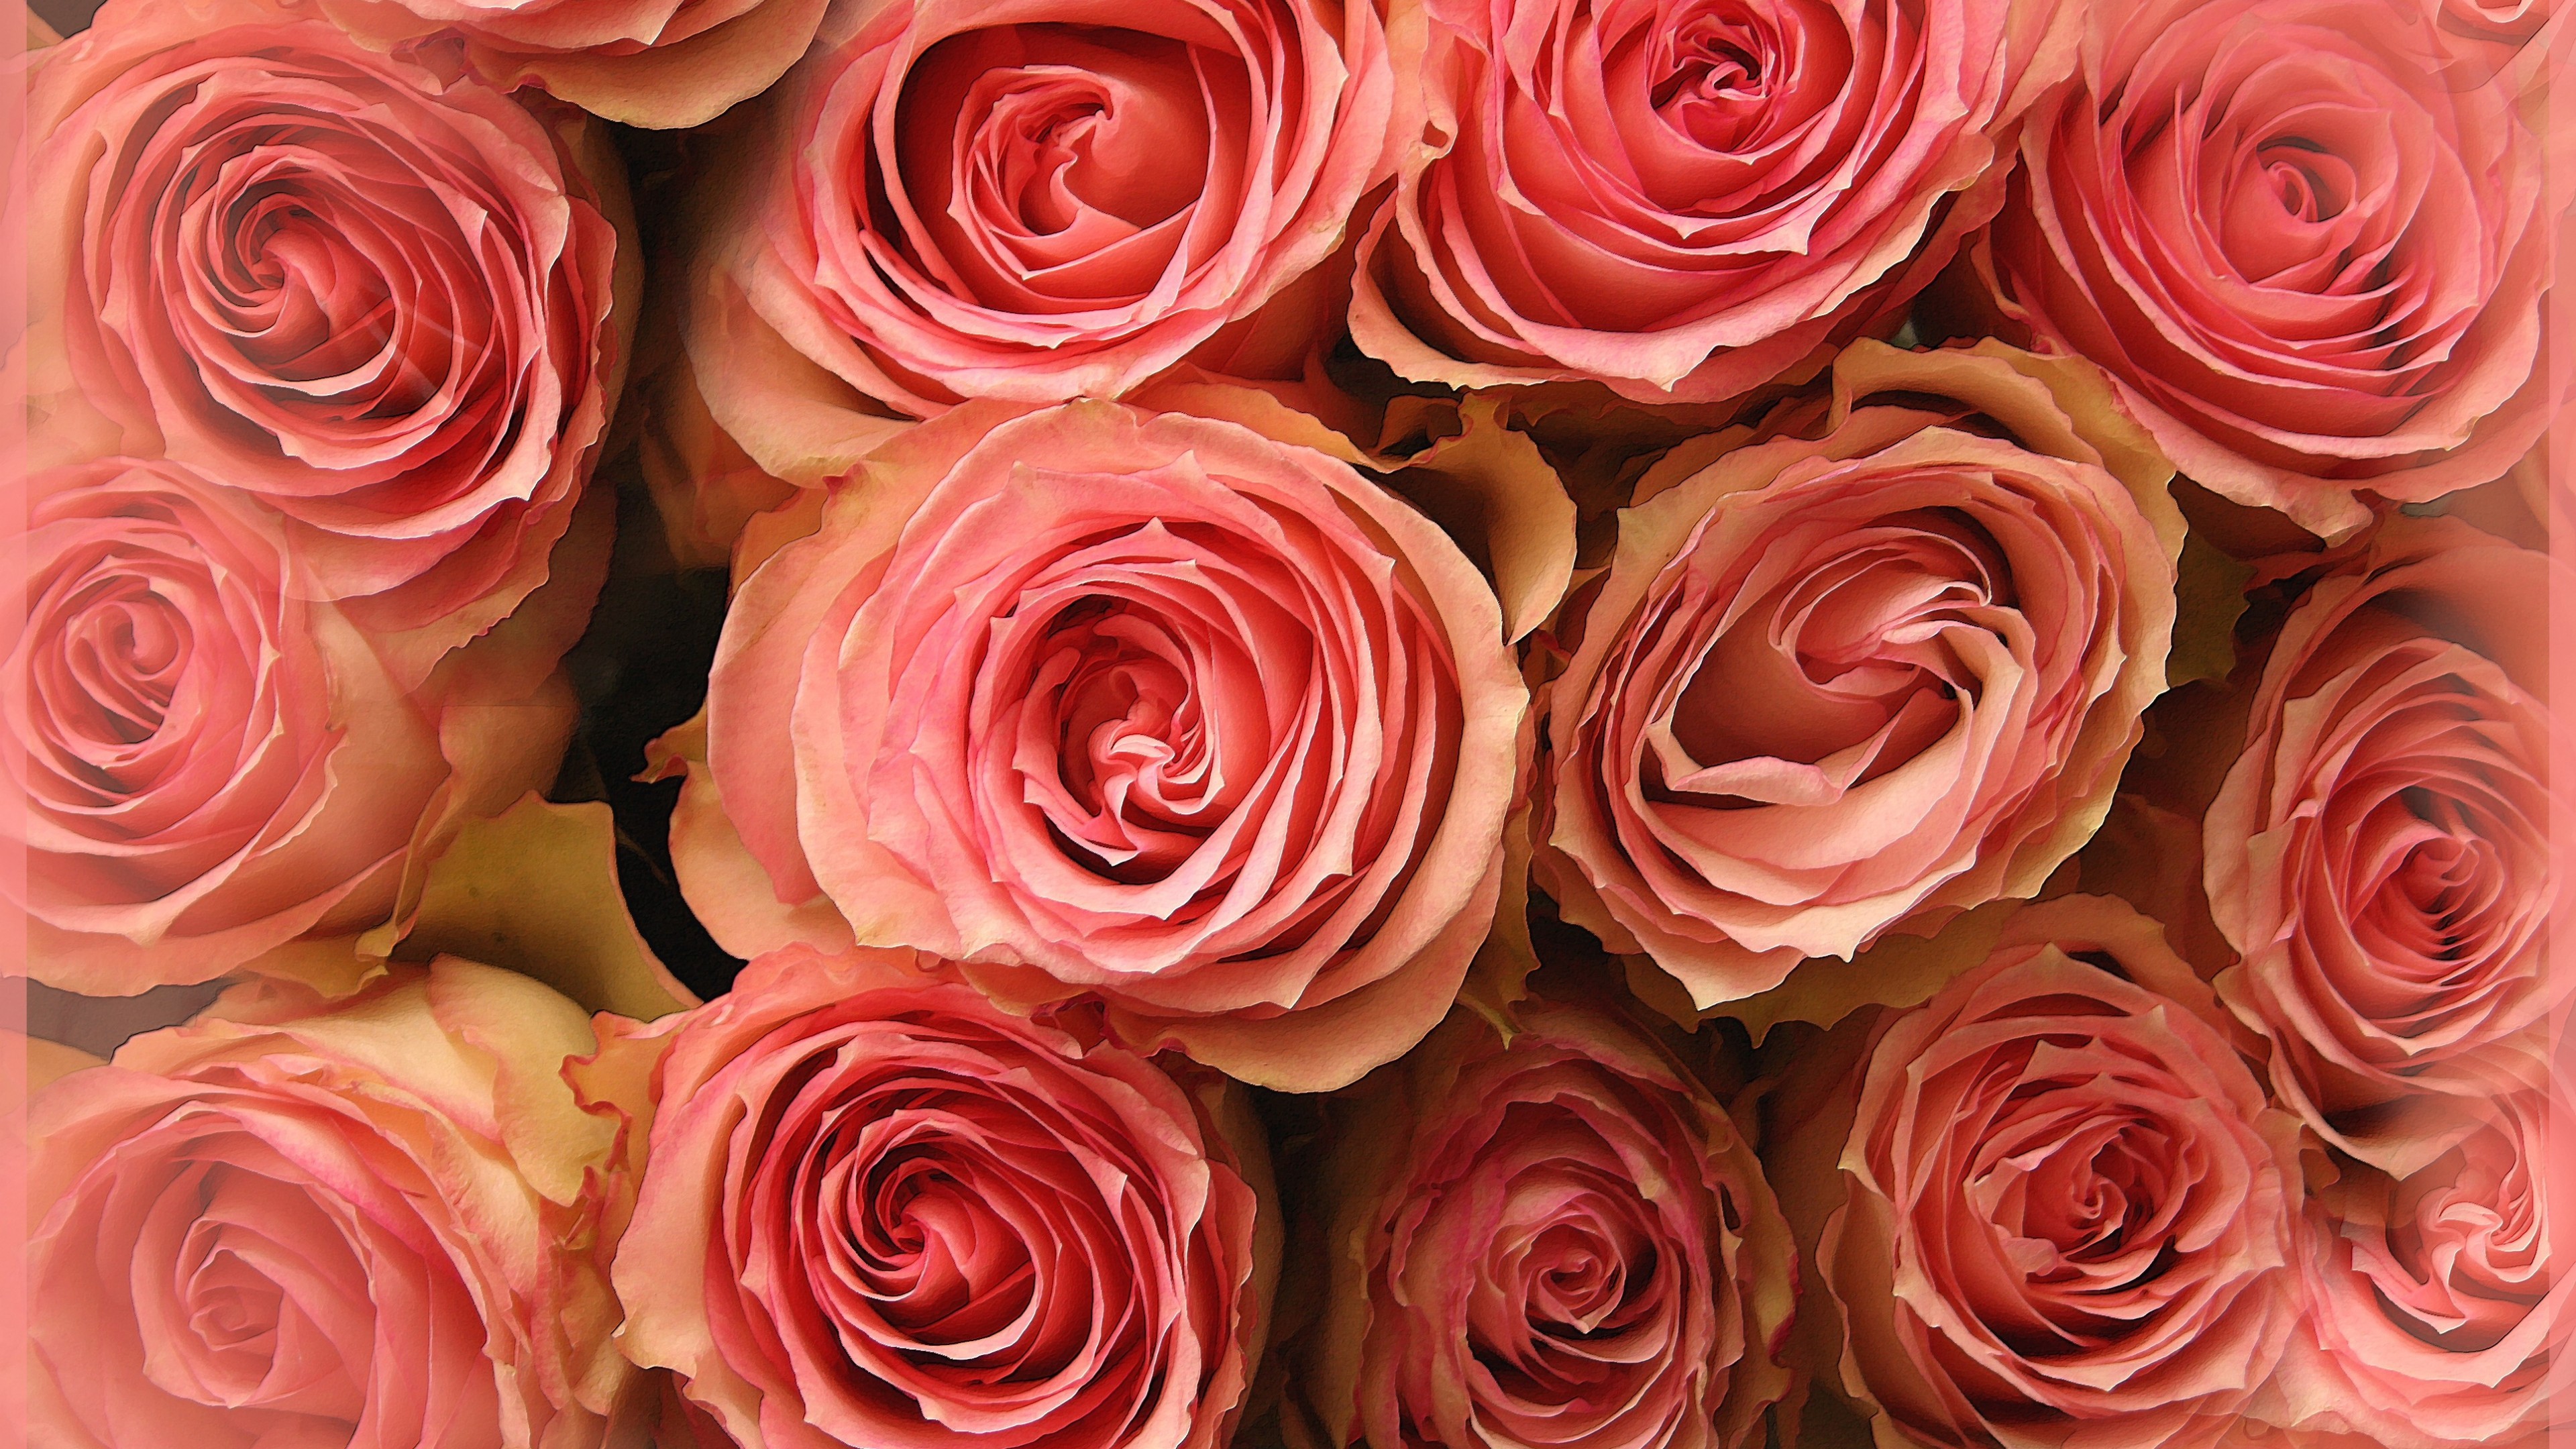 3840x2160, Flowers / Pink Roses Wallpaper 
 Data Id - Flowers Hd Photos Free Download - HD Wallpaper 